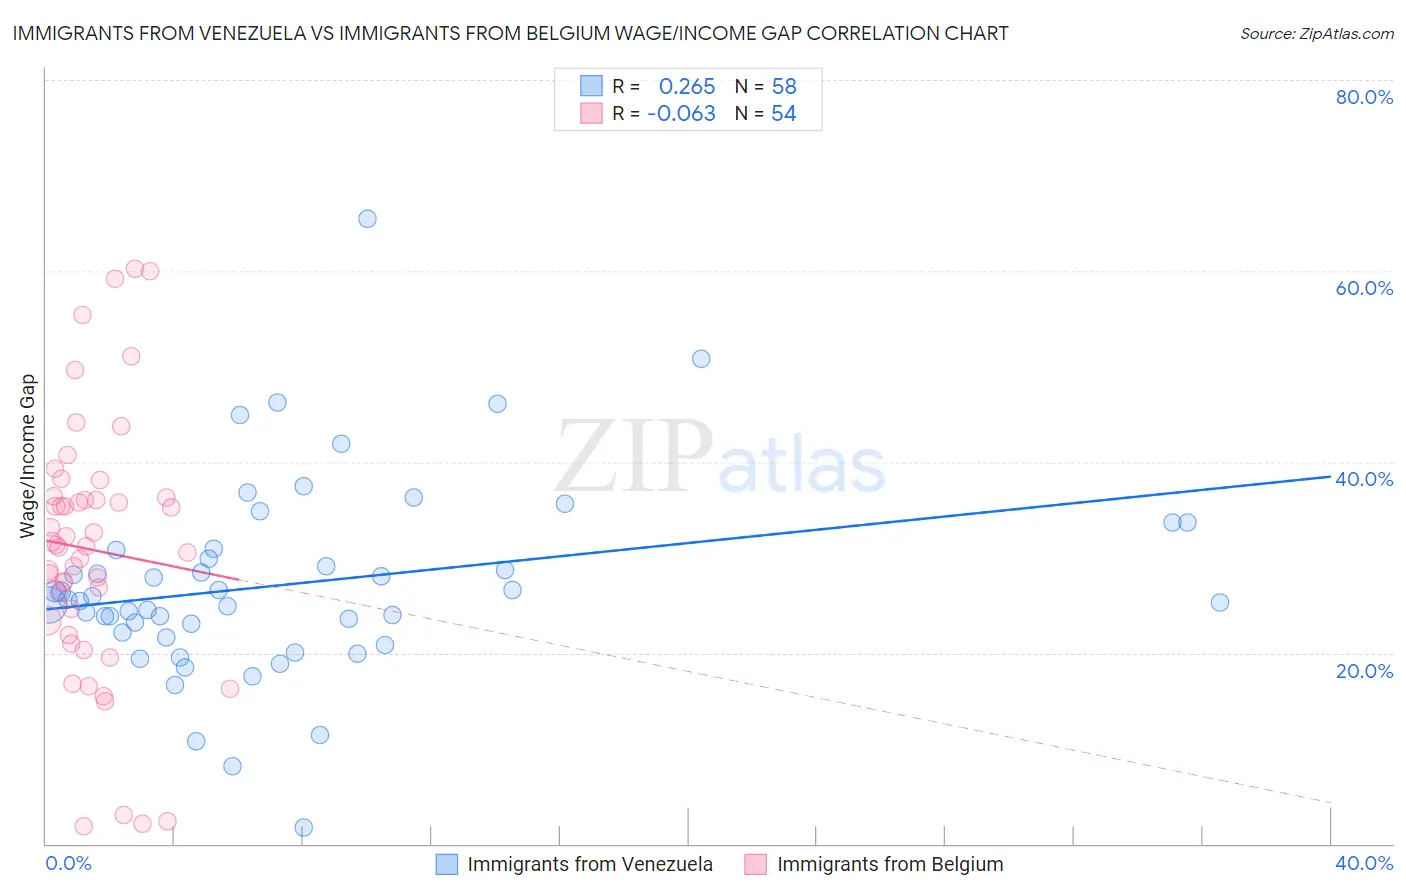 Immigrants from Venezuela vs Immigrants from Belgium Wage/Income Gap